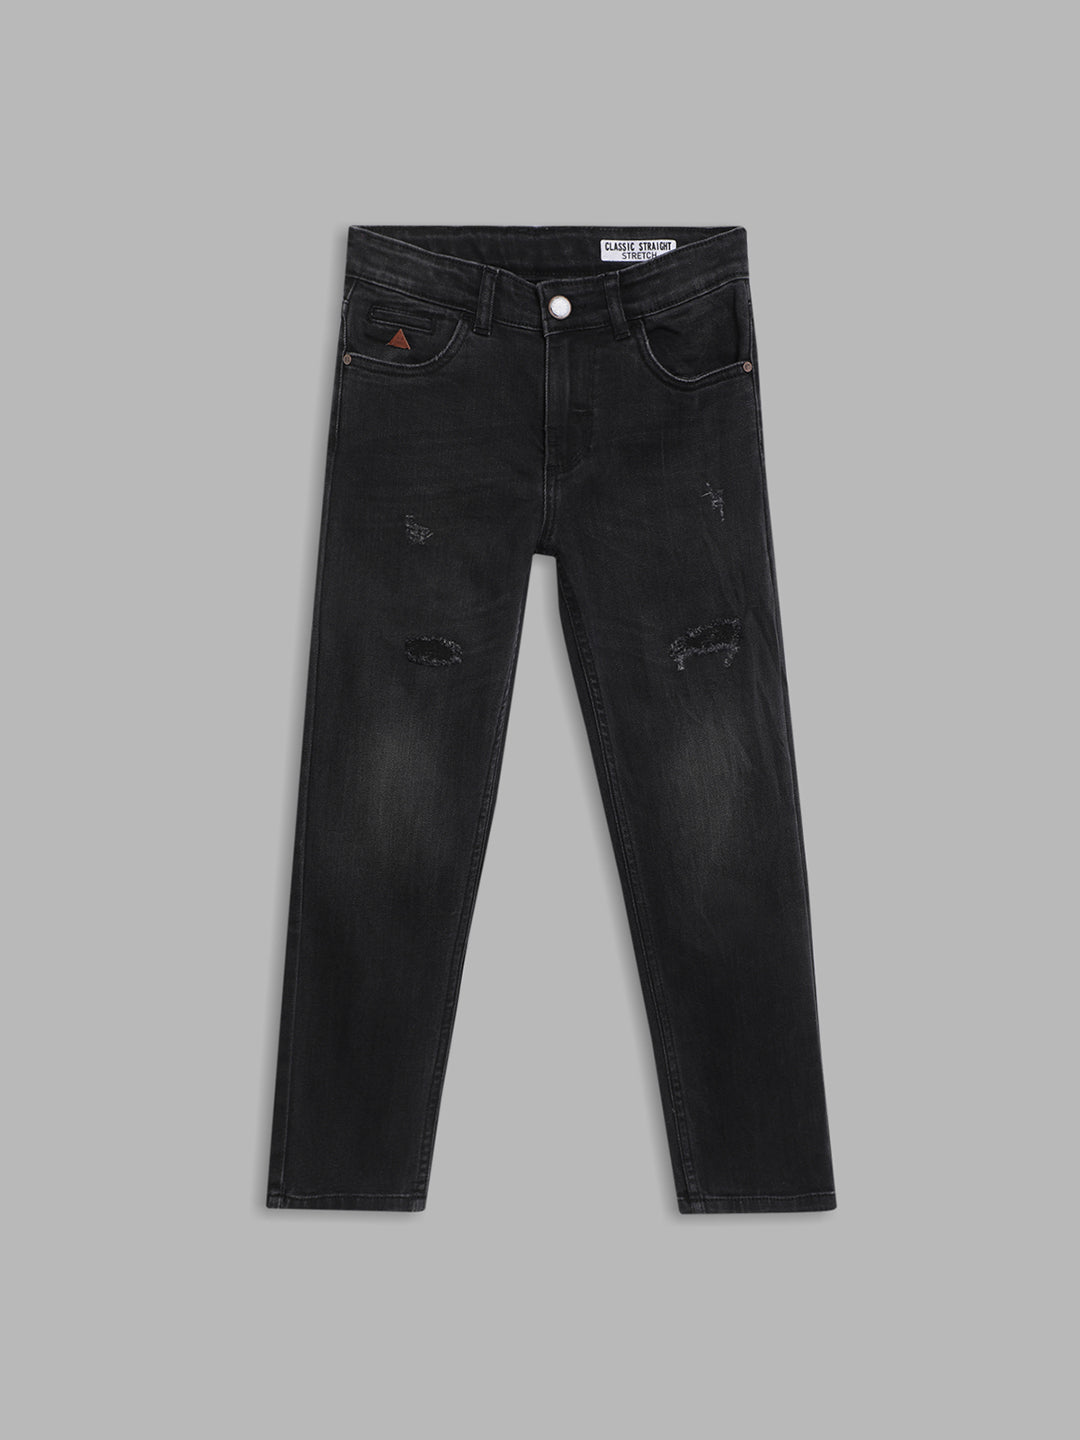 Blue Giraffe Boys Charcoal Solid Straight Fit Jeans